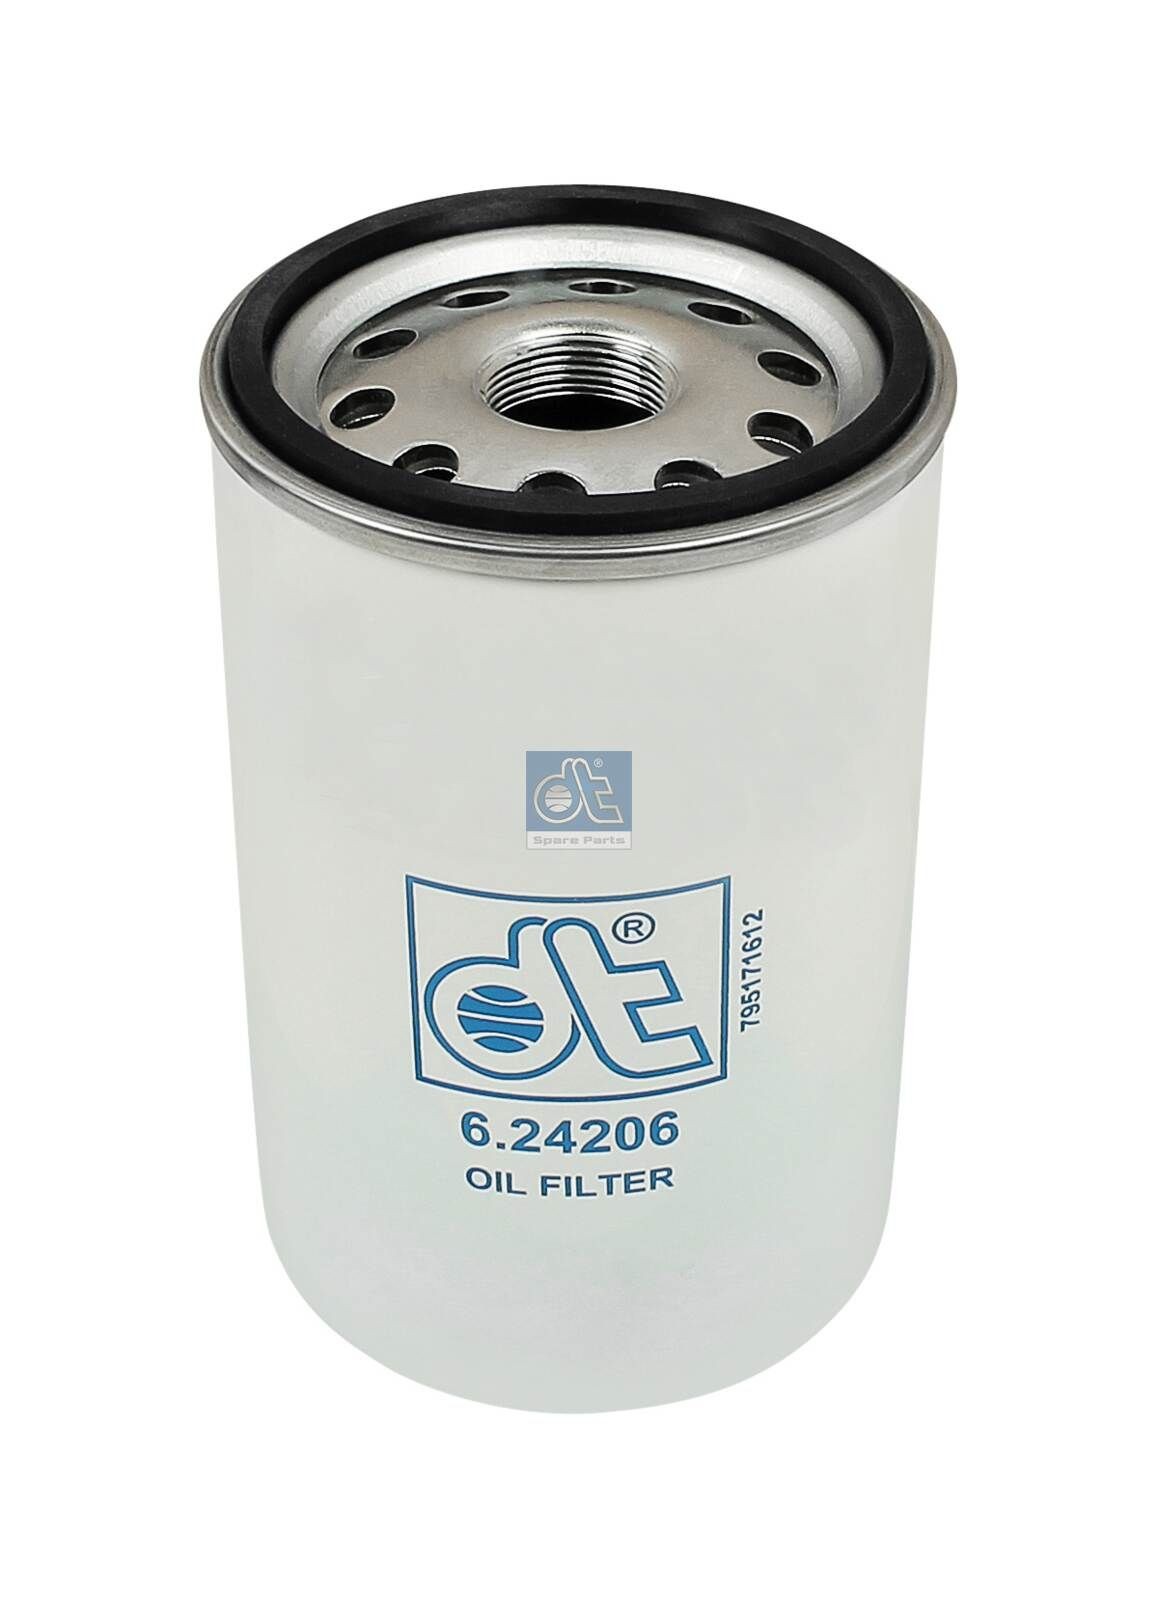 W 1160/2 DT Spare Parts 6.24206 Oil filter 74 23 246 464